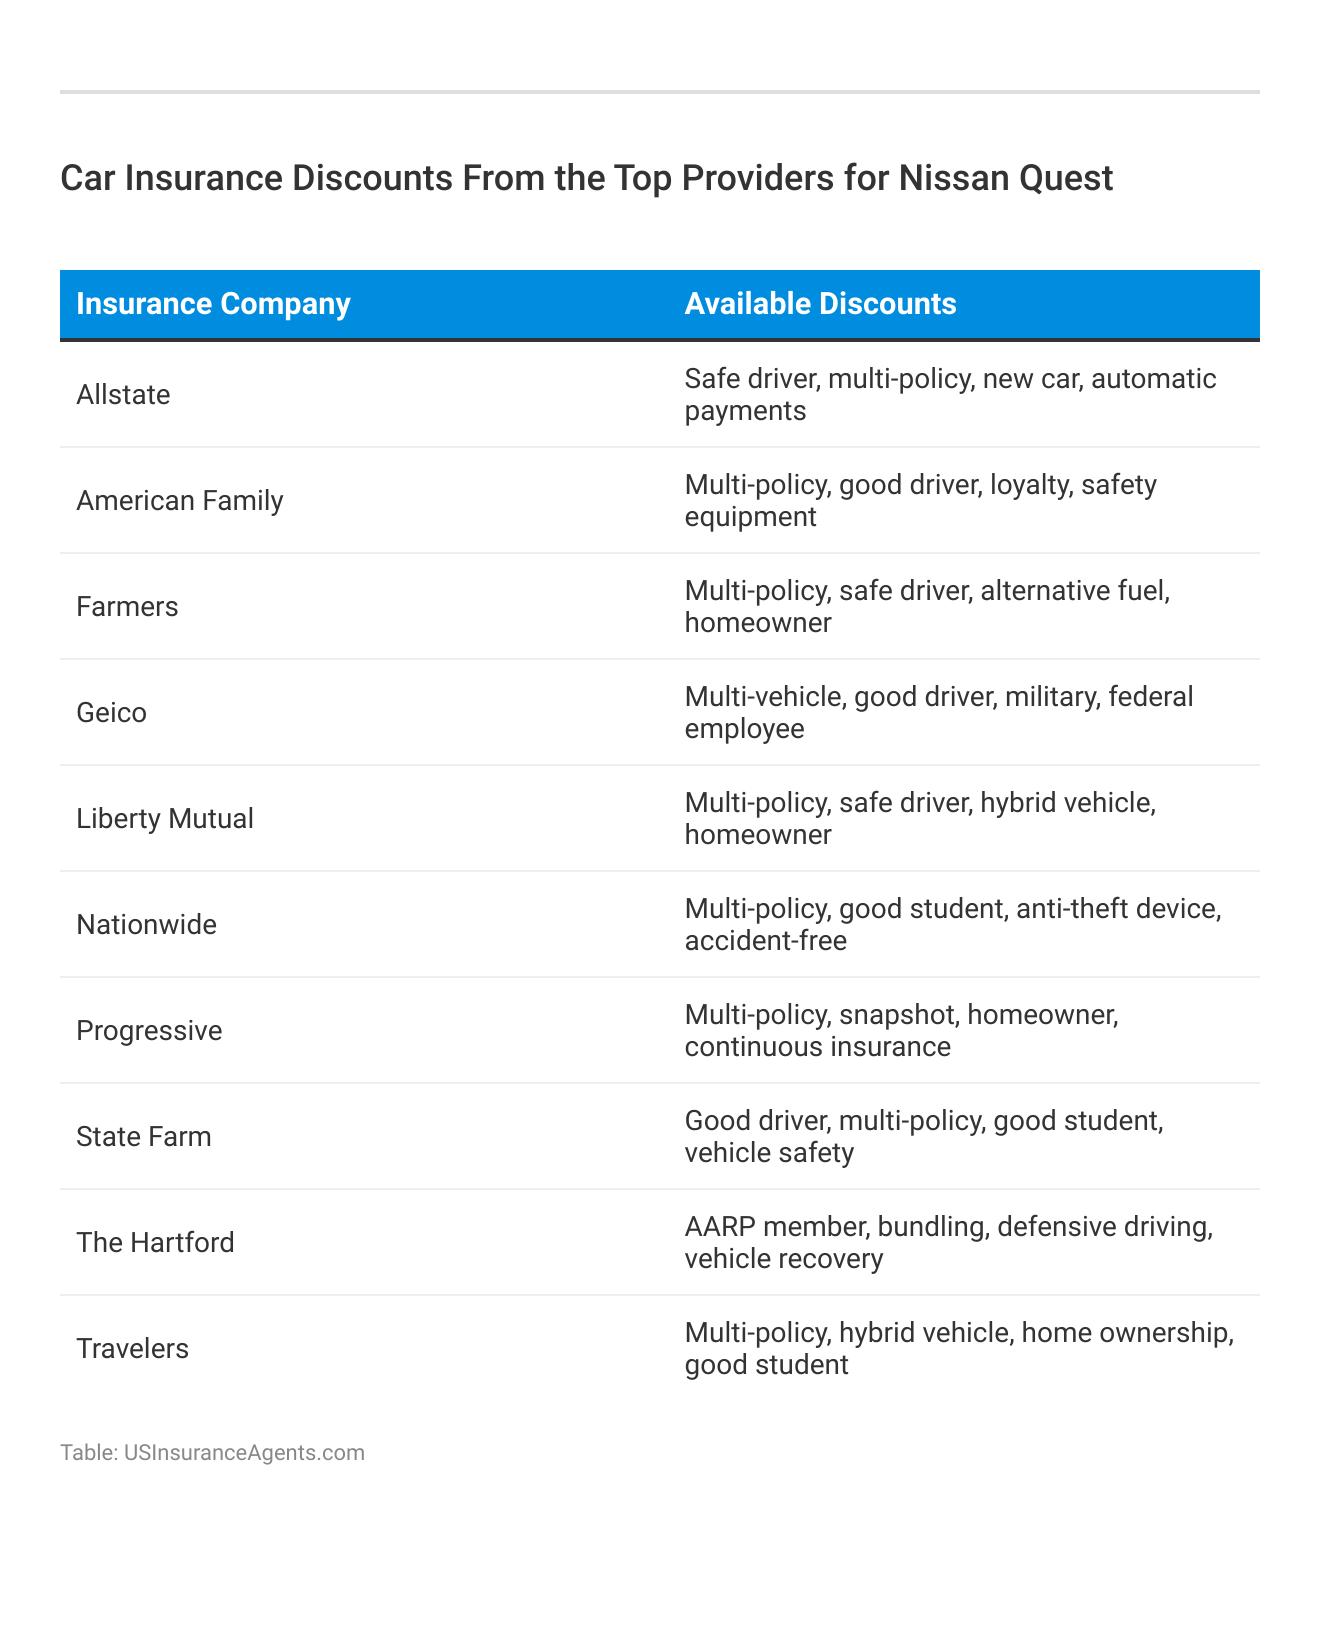 <h3>Car Insurance Discounts From the Top Providers for Nissan Quest</h3>